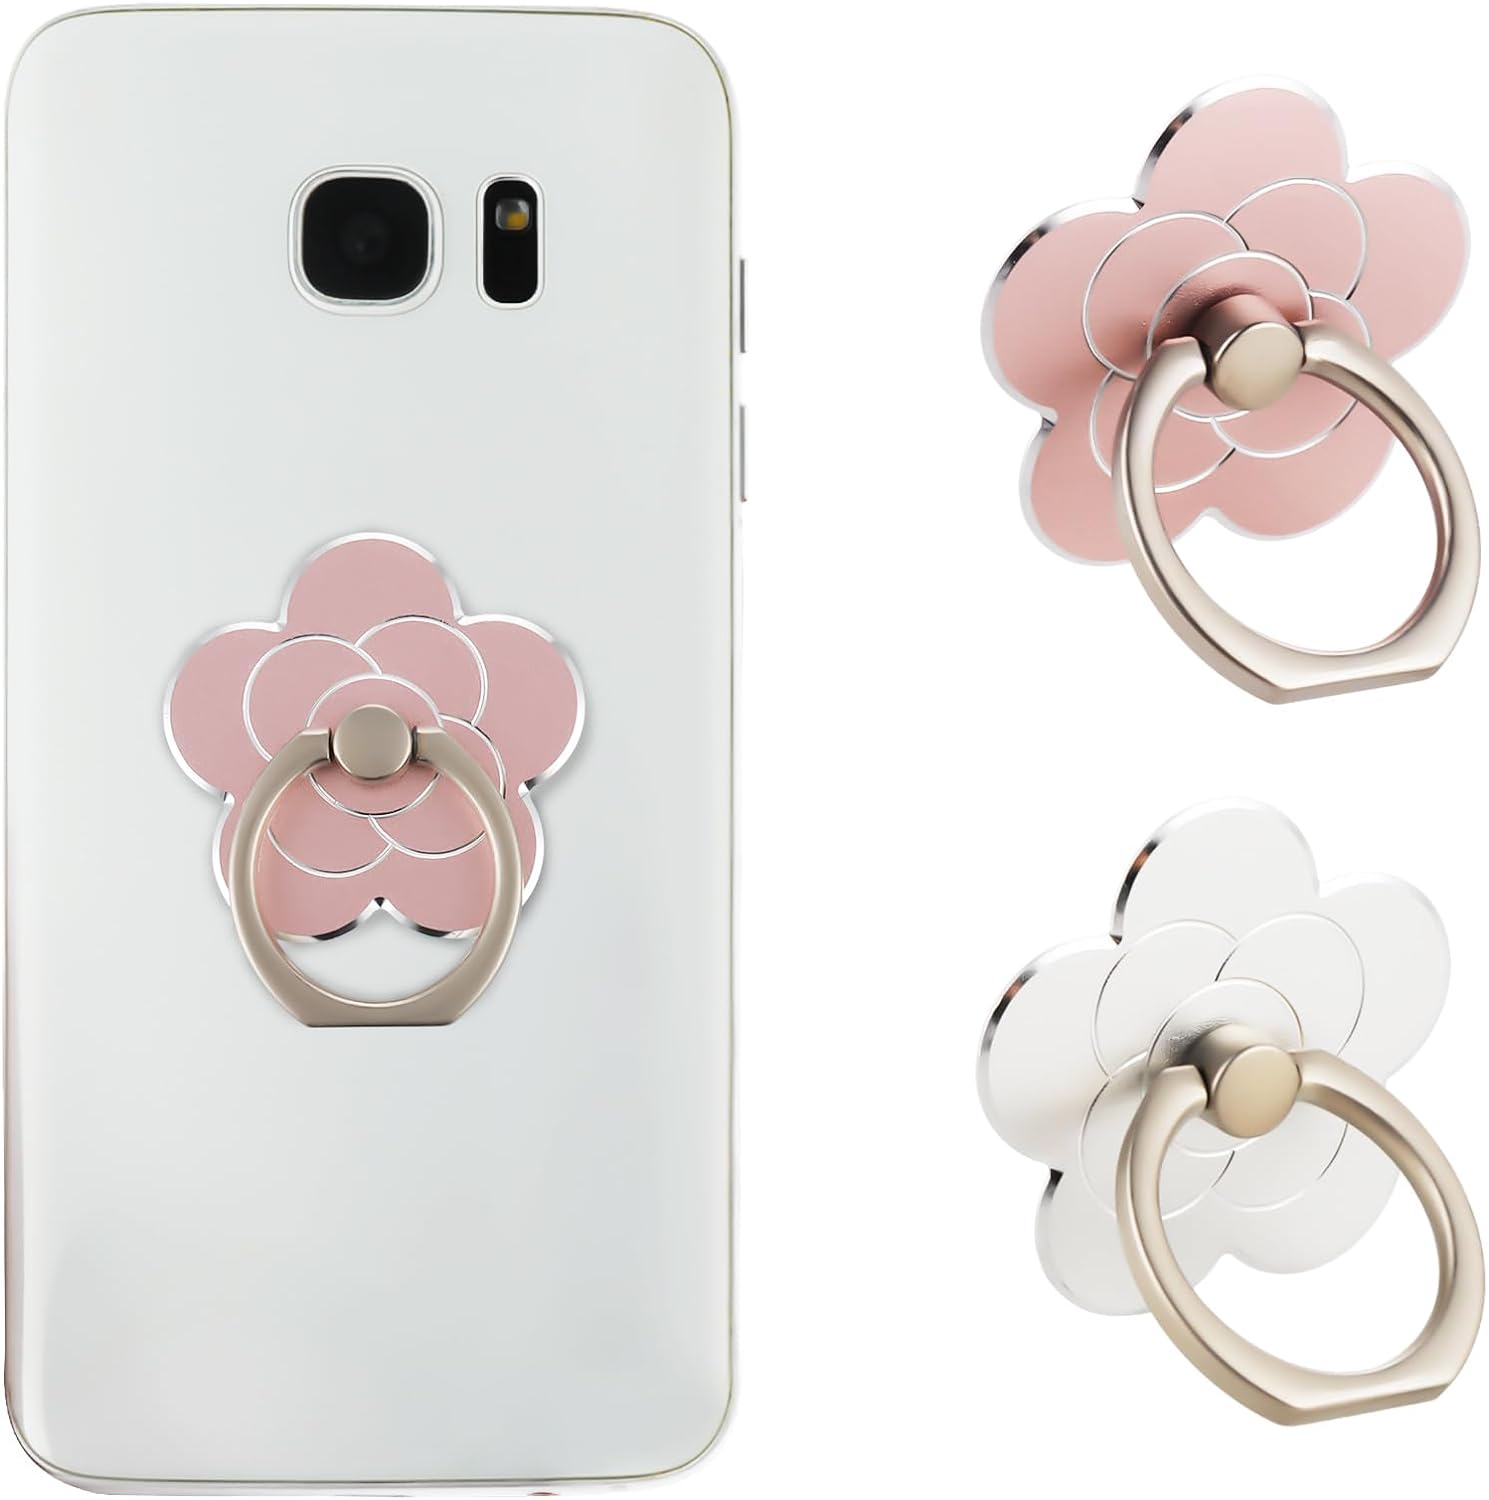 Sibba 2pcs Phone Ring Holder Kickstand Cellphone Flower Finger Ring Grips Stand Metal Universal Accessories Compatible with Smartphone, Mobile Phones, Phone case (Silver, Rose Gold) - Amazing Gadgets Outlet